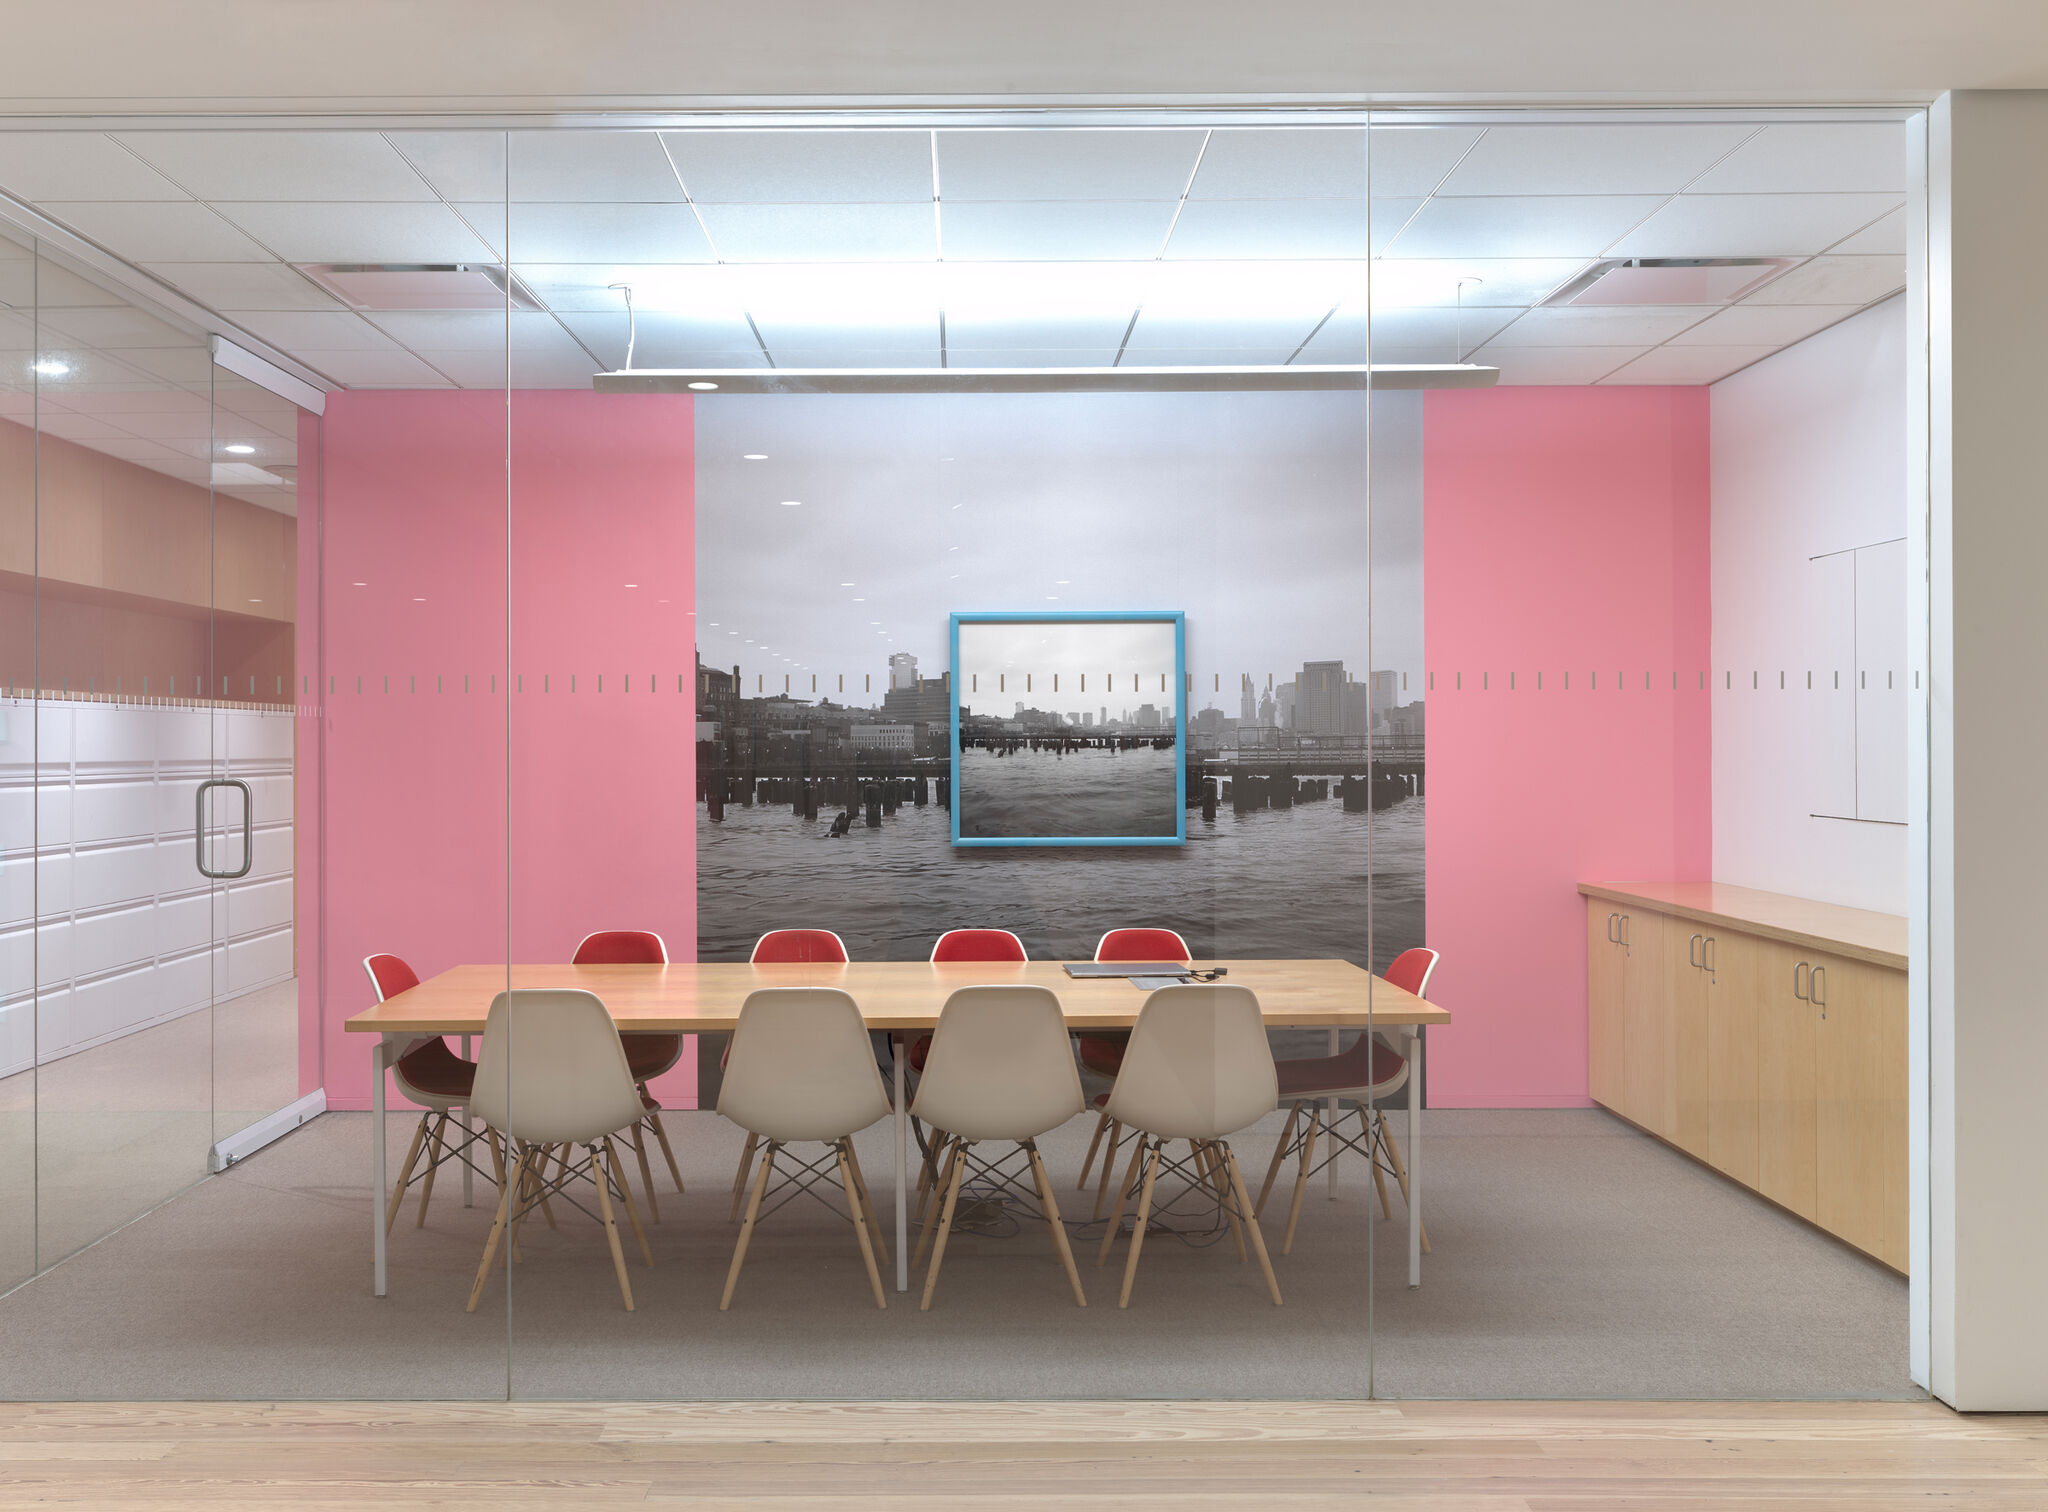 Black and white photographs on a pink wall in a conference room.